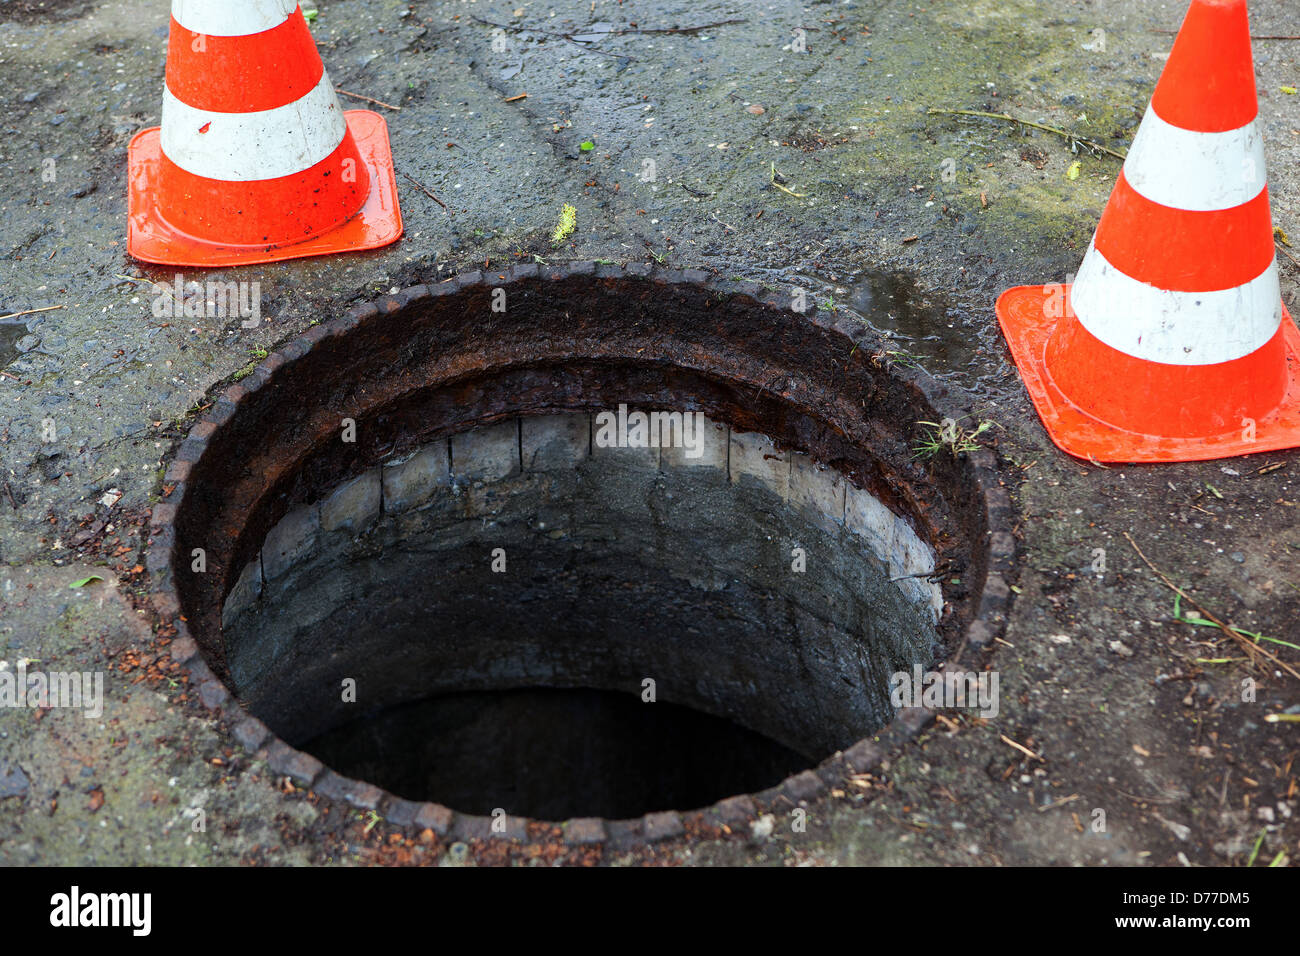 Open manhole cover with traffic cones Stock Photo